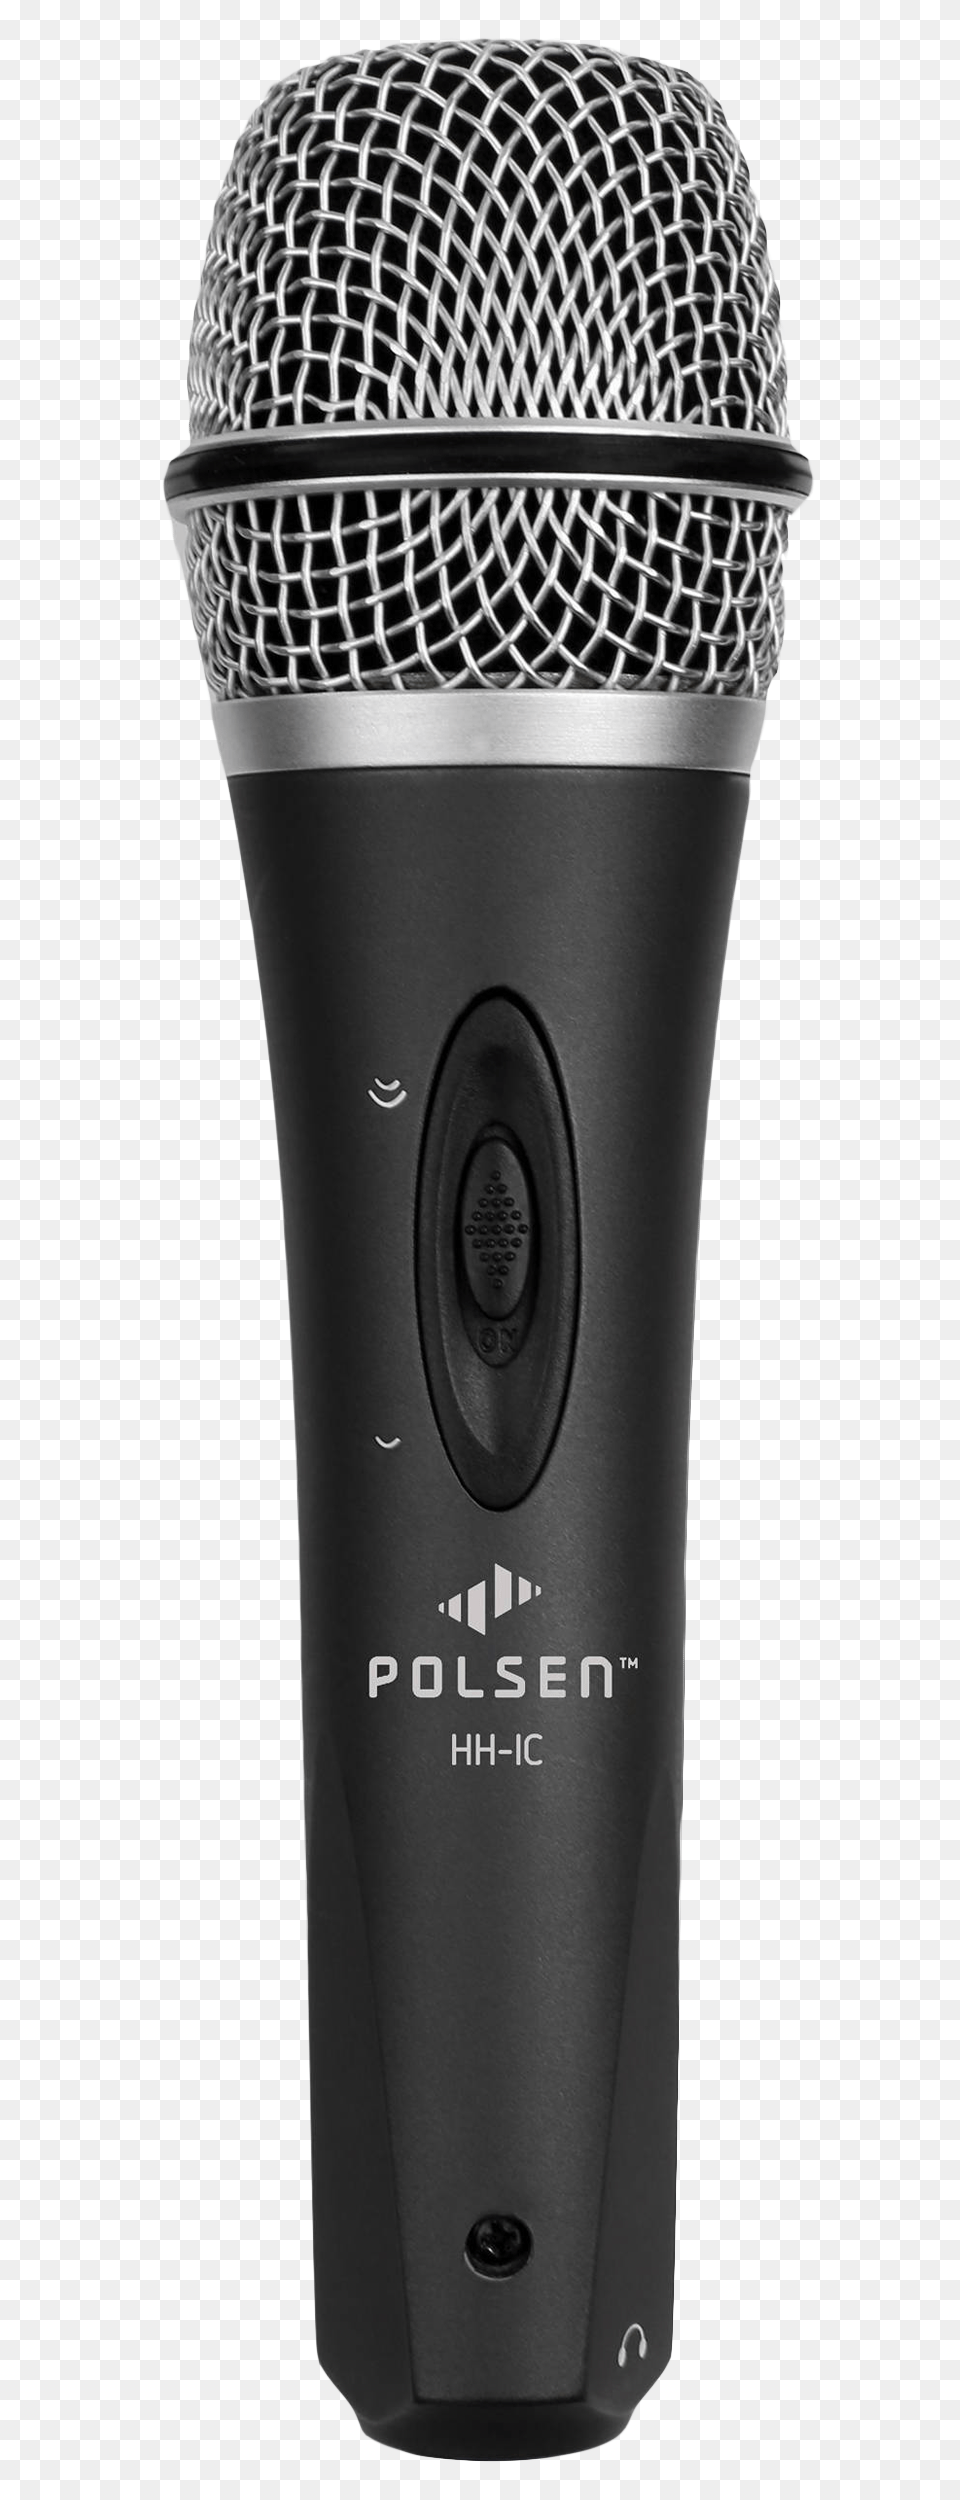 Microphone Image, Electrical Device, Bottle, Shaker Png